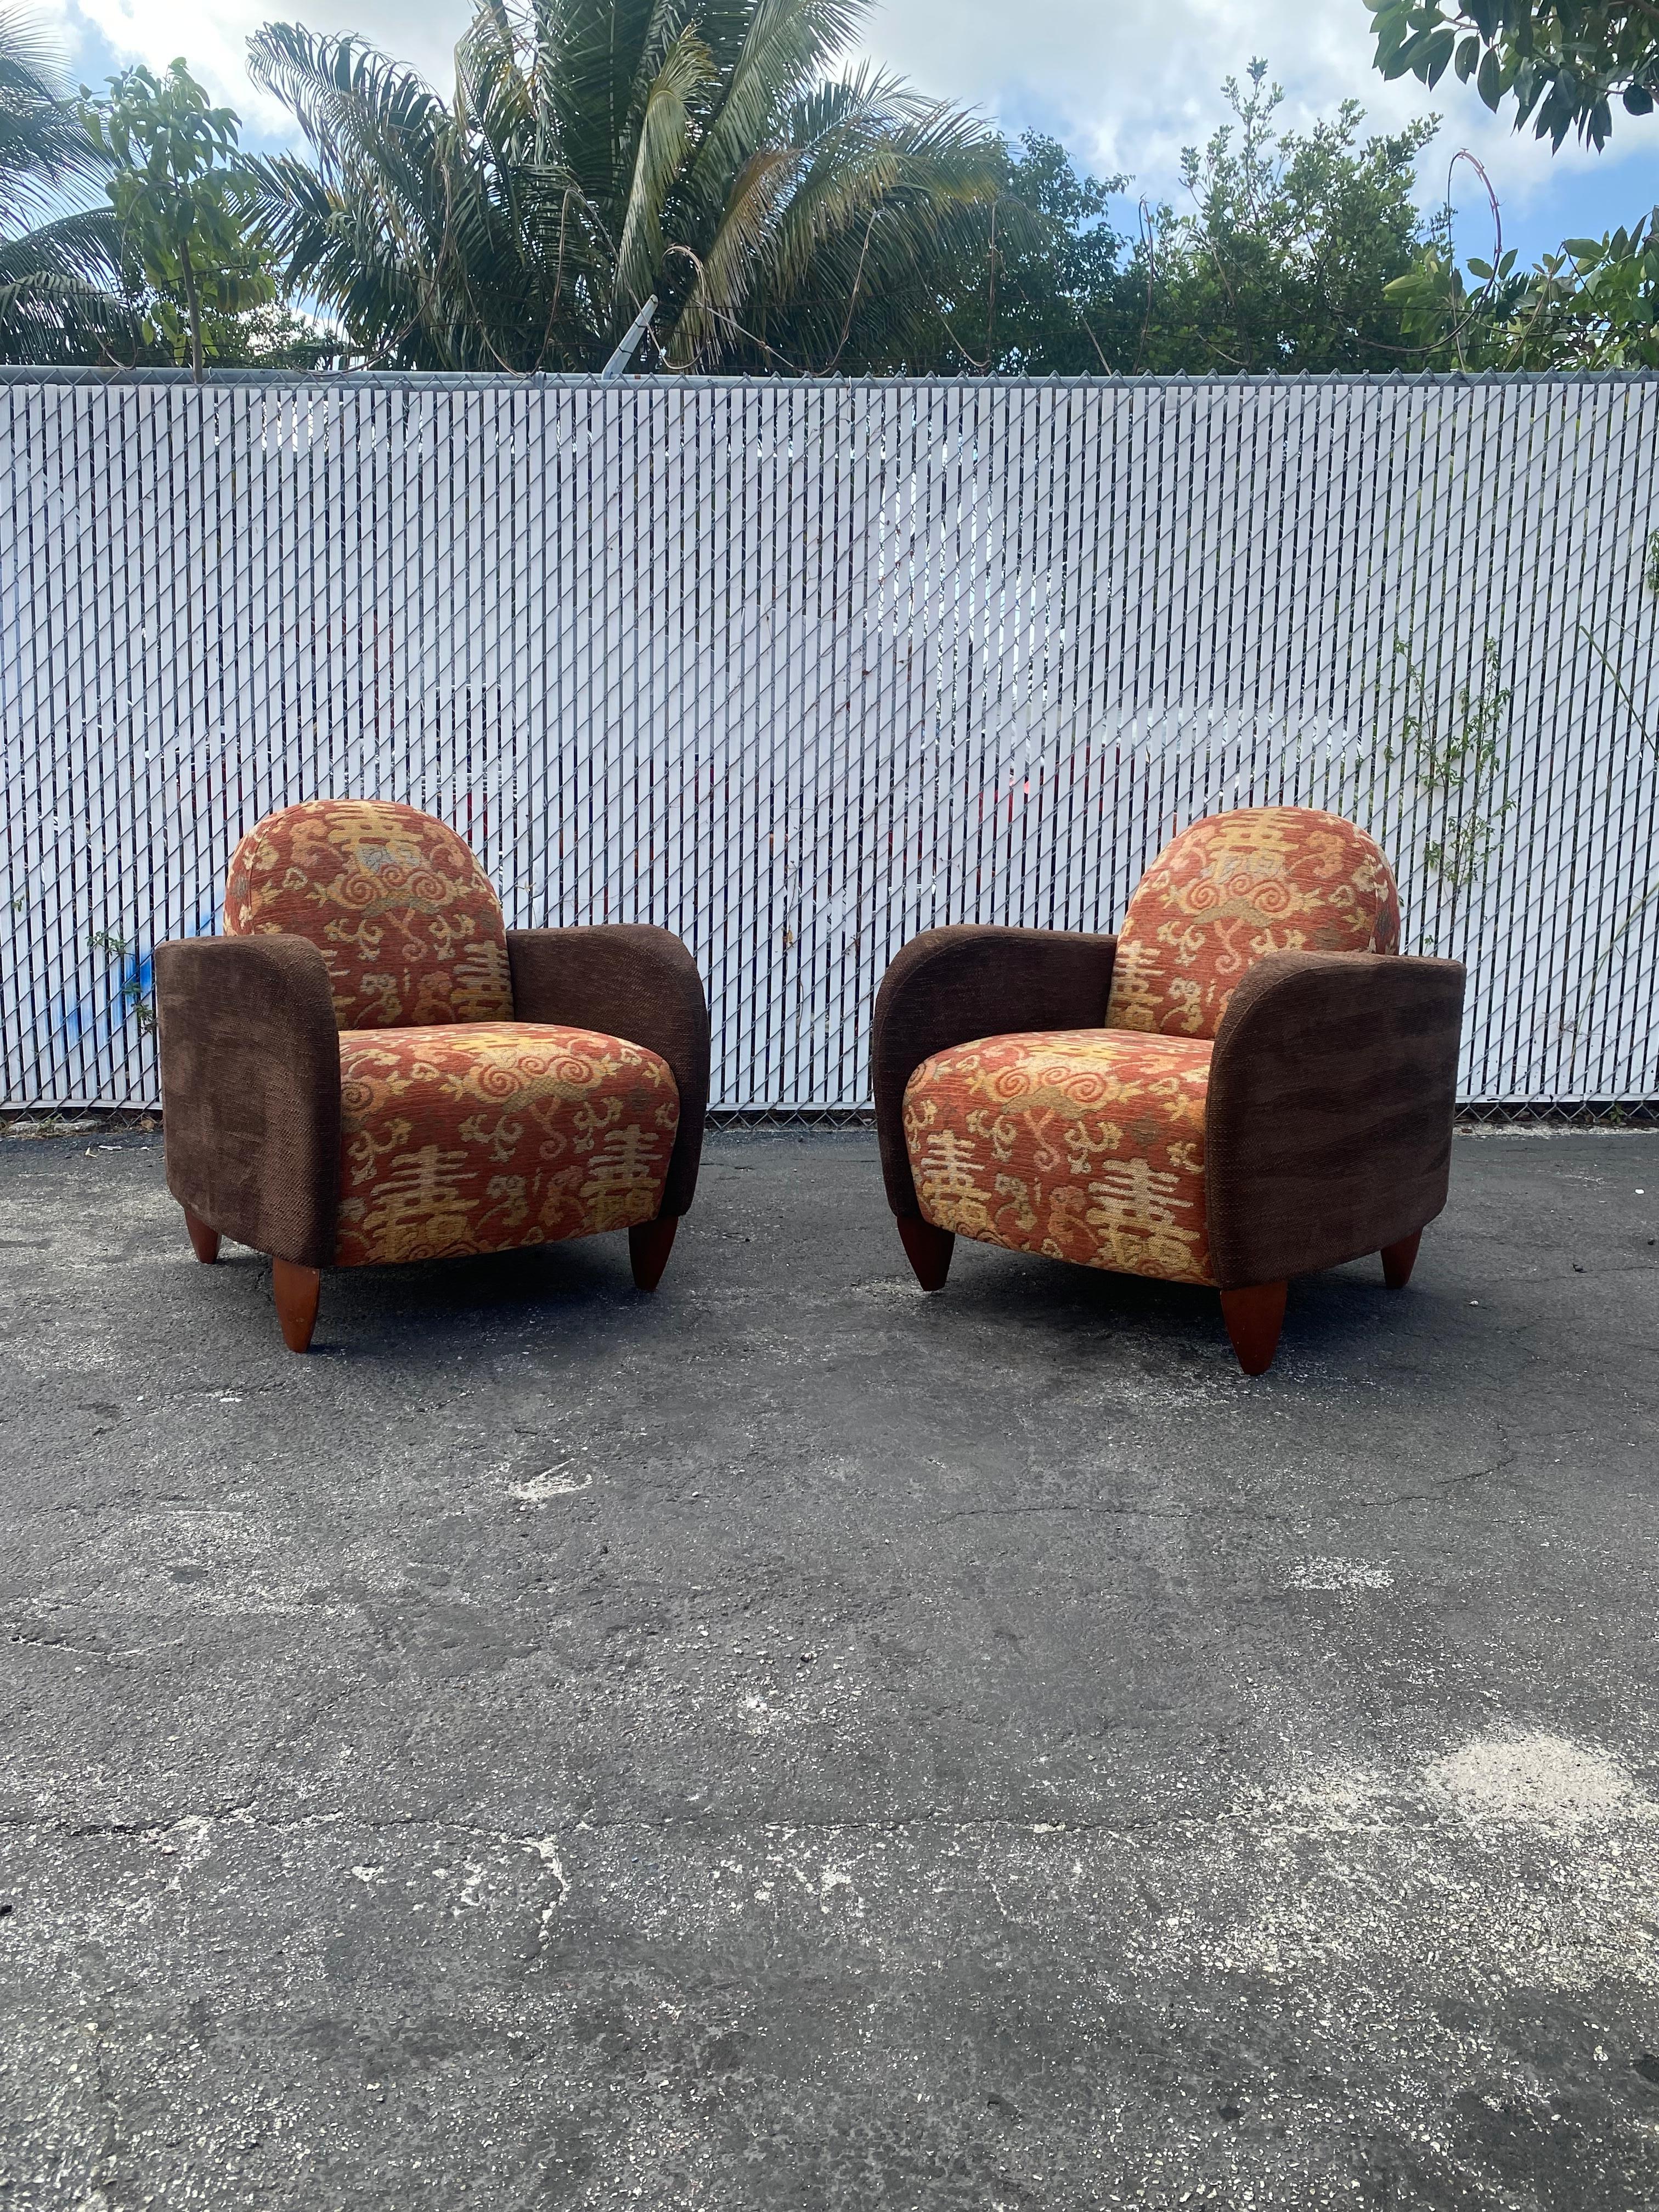 1970s Sculptural Art Deco Chenille Walnut Curved Chairs, Set of 2 In Good Condition For Sale In Fort Lauderdale, FL